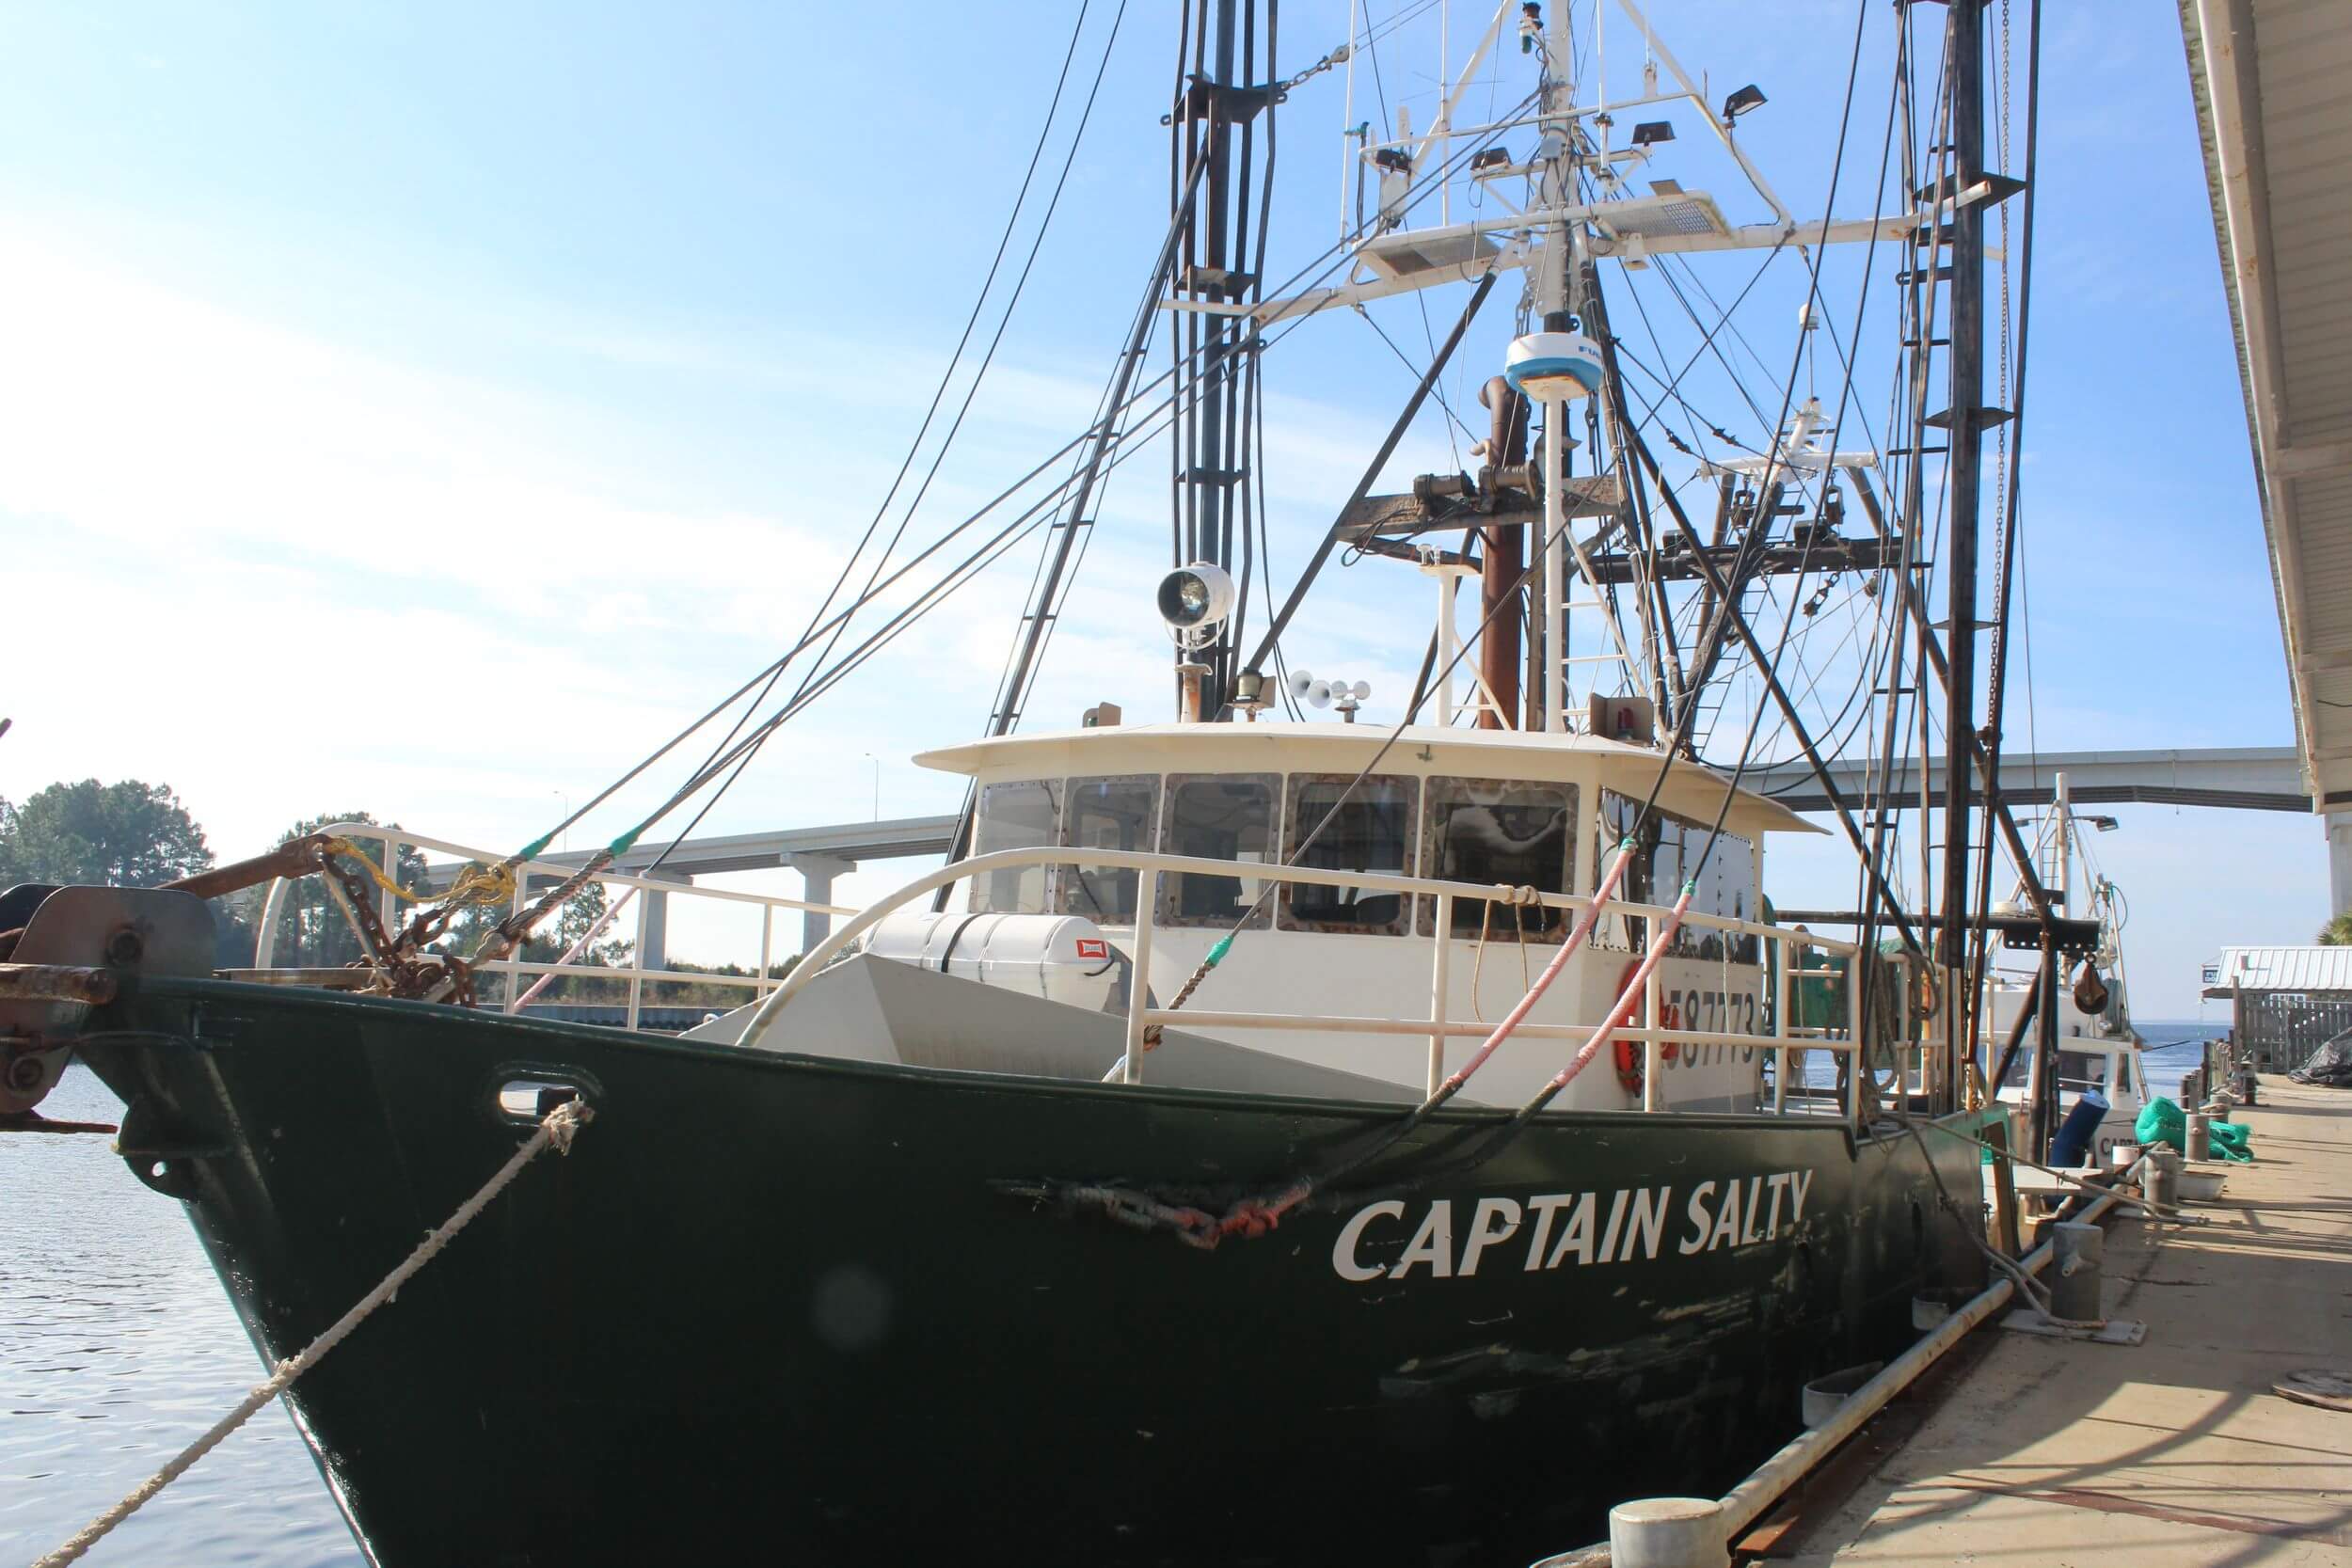 Docked fishing boat titled captain salty.